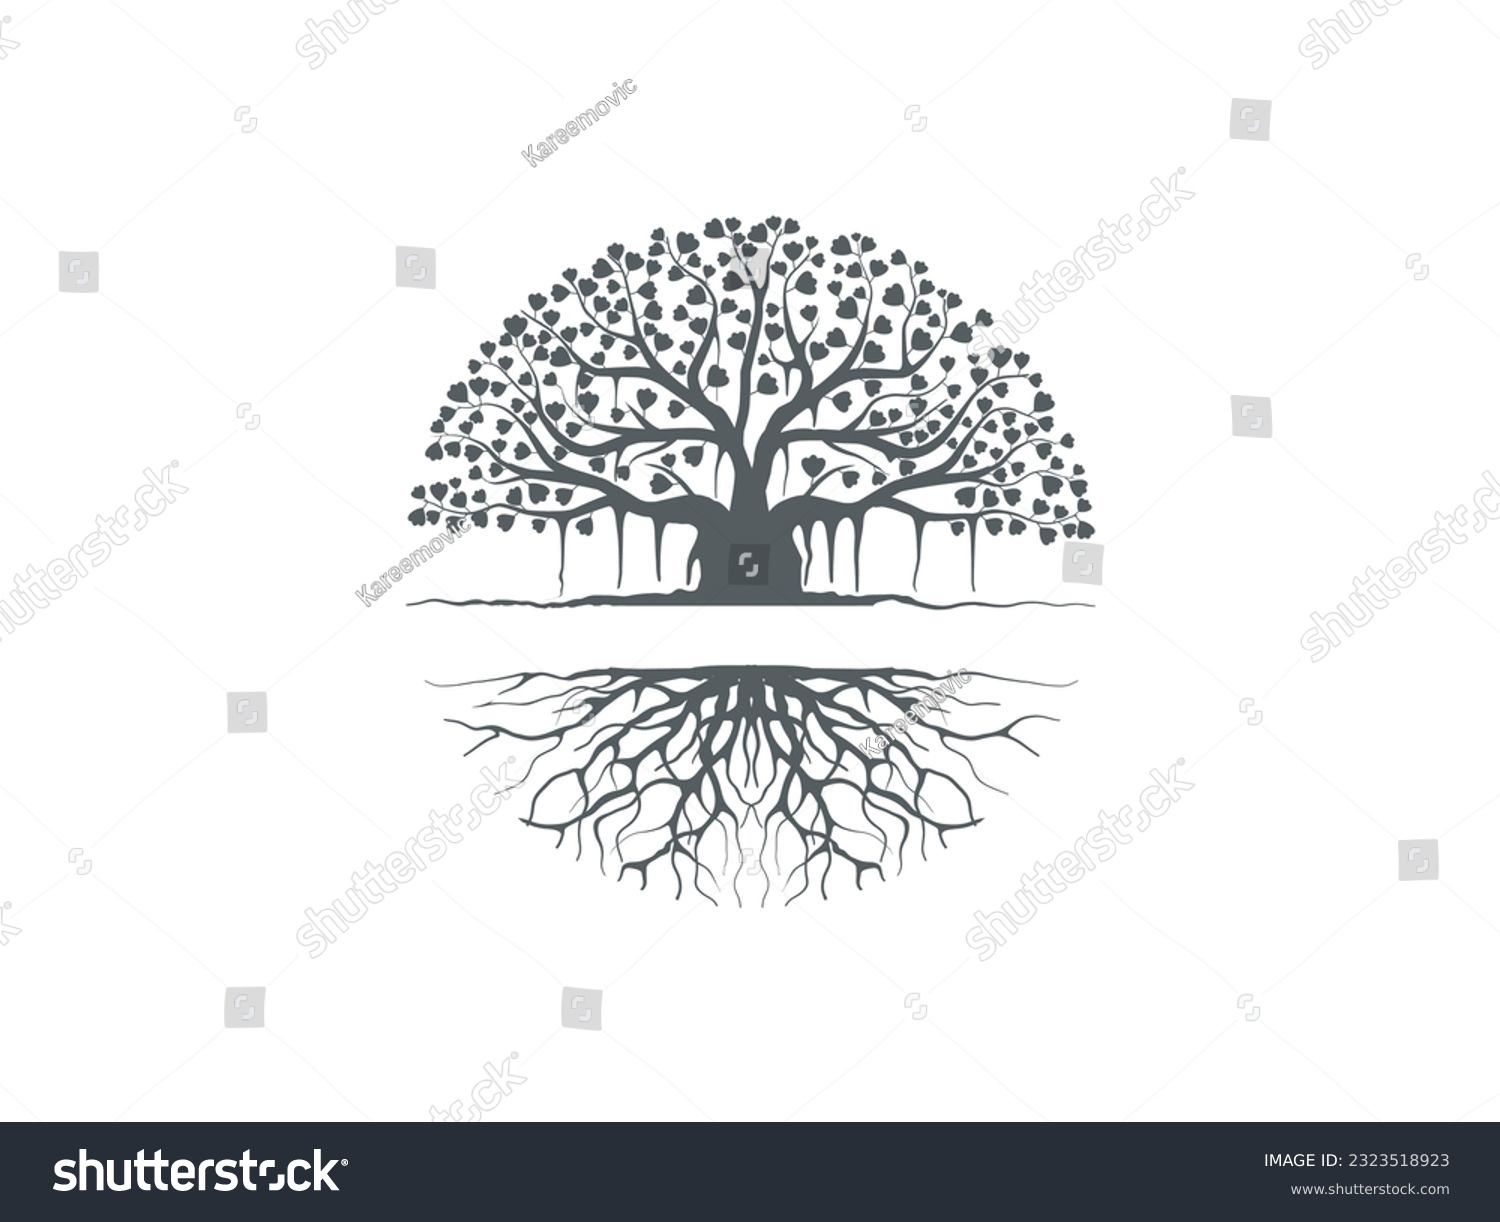 SVG of Silhouette of Banyan tree vector illustrations, hand drawn art isolated  svg